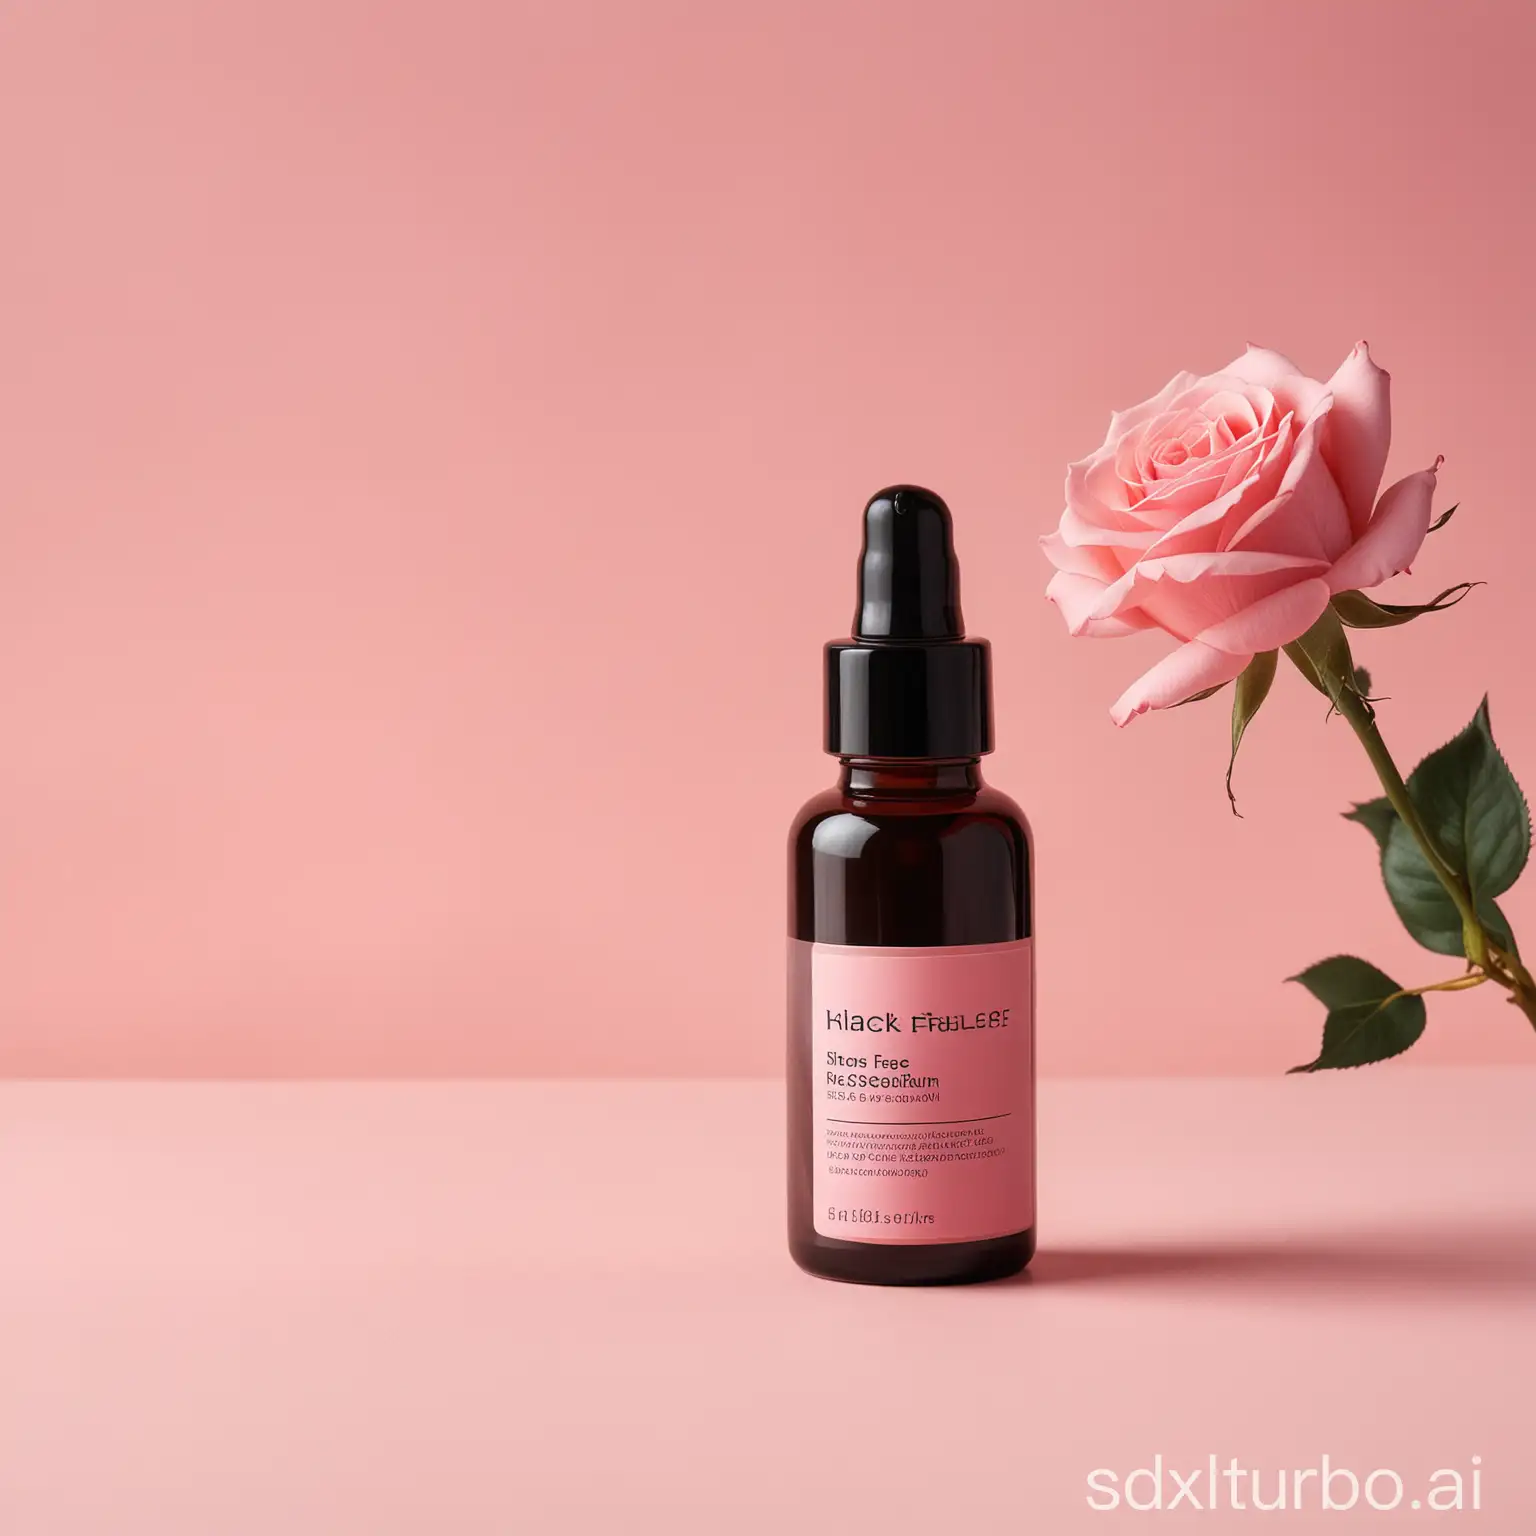 Professional-Black-Face-Rose-Serum-Bottle-with-Blank-Label-in-Aesthetic-Minimal-Composition